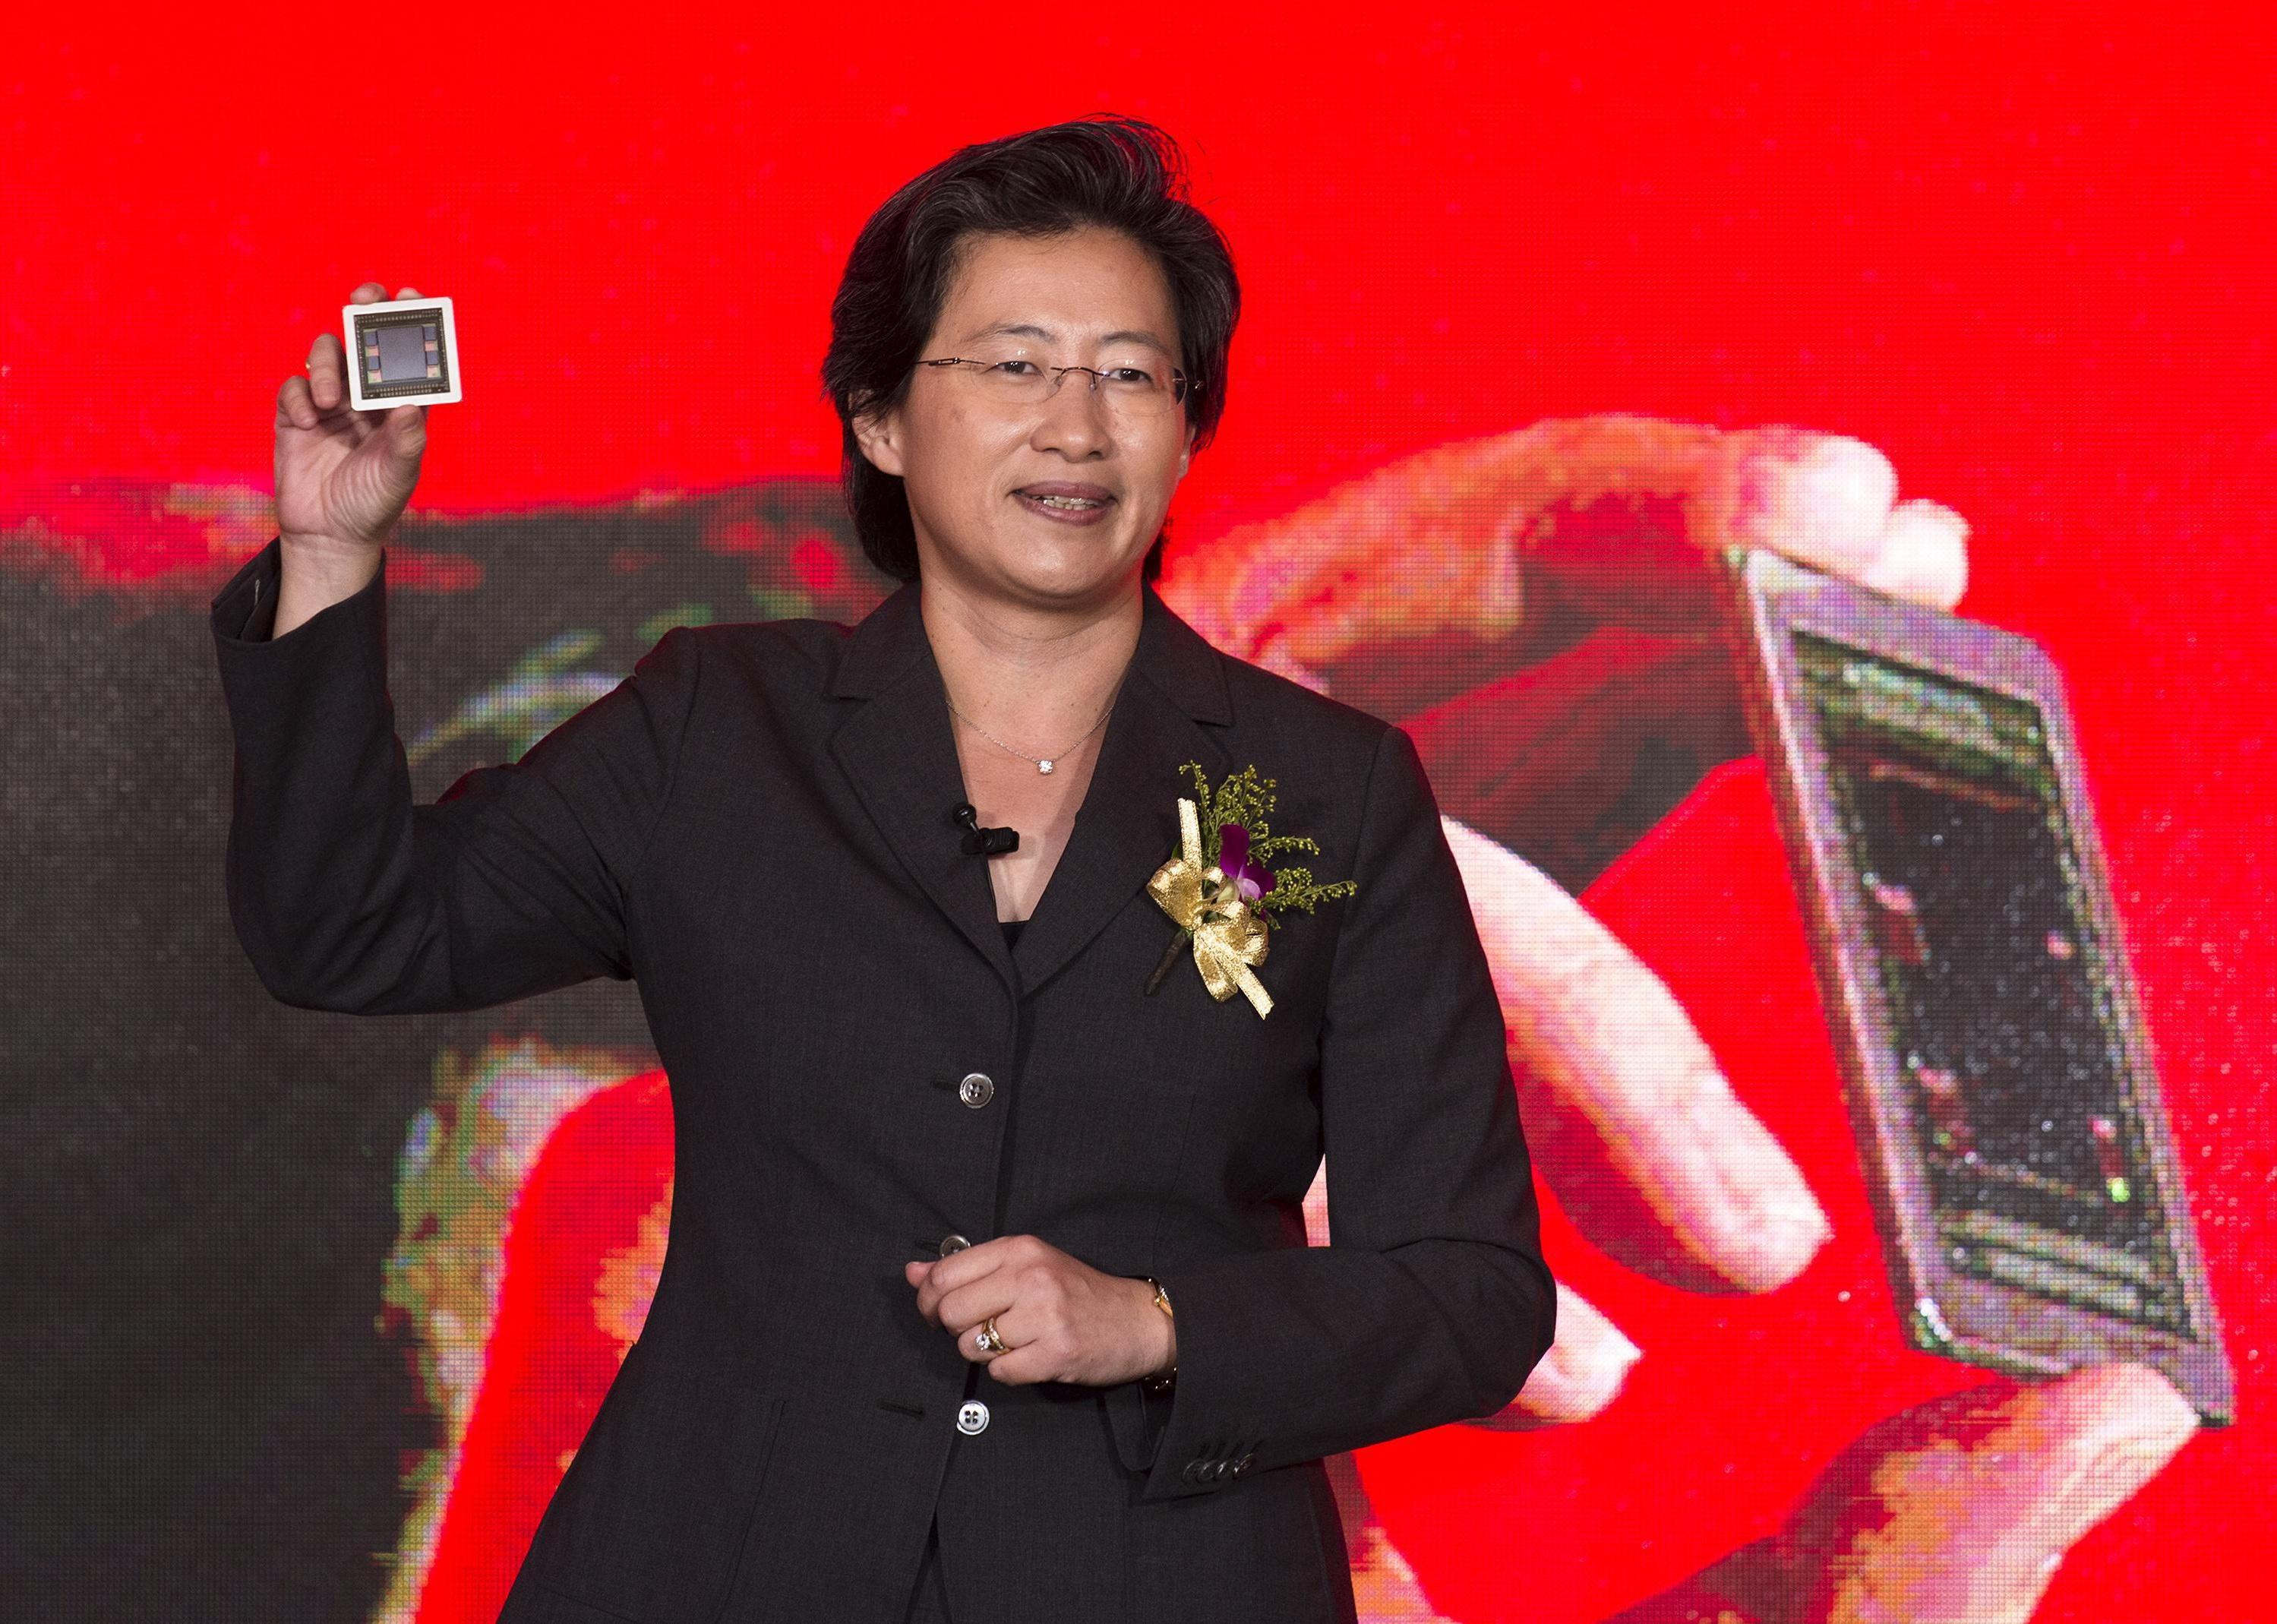 Lisa Su in a black suit holding up a small device.